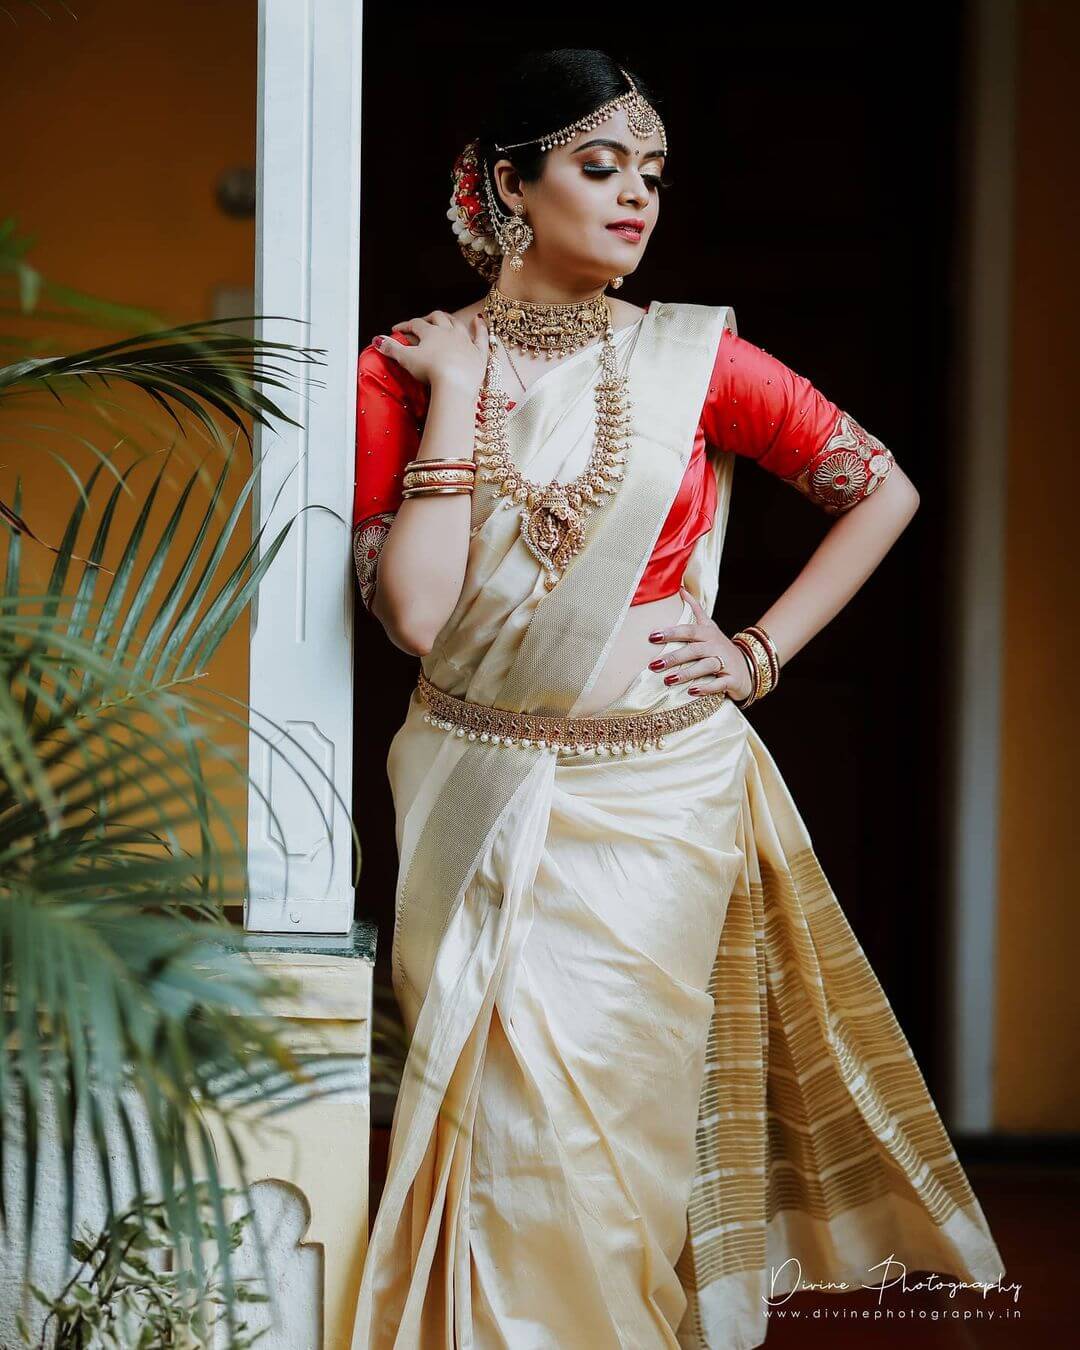 South Indian Wedding Saree for Traditional Bride - K4 Fashion